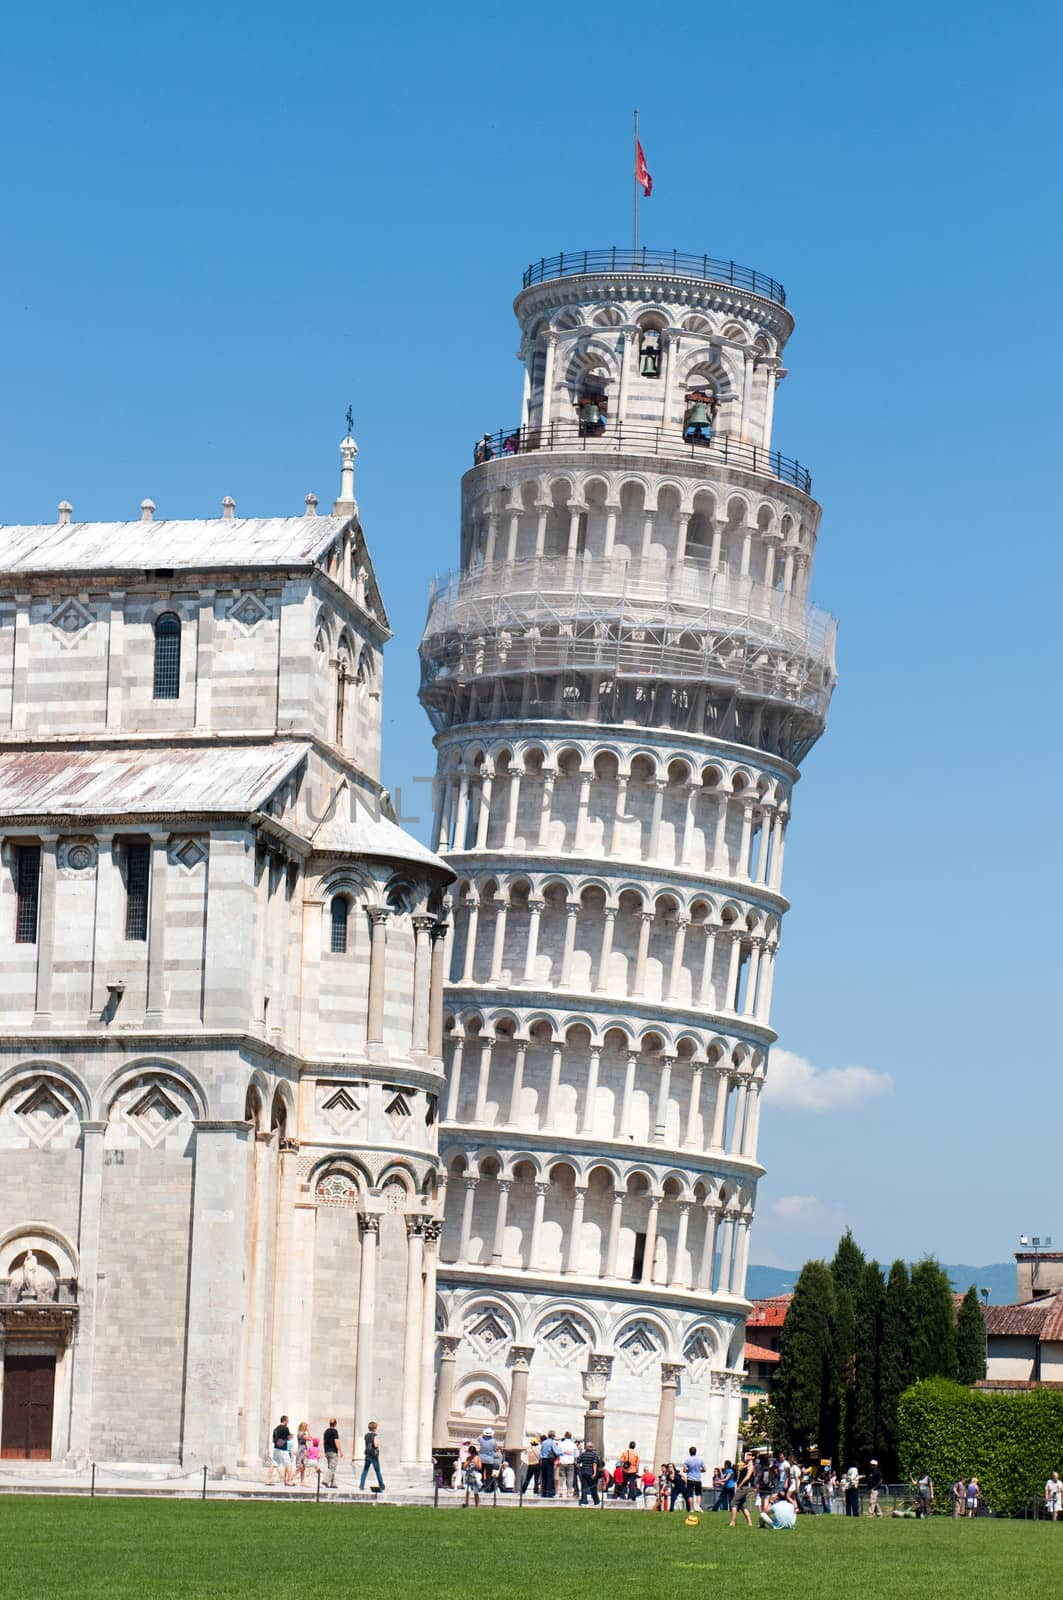 Crowds of tourists visit the cathedral and  the leaning tower of Pisa. Piazza dei miracoli, Pisa, Italy